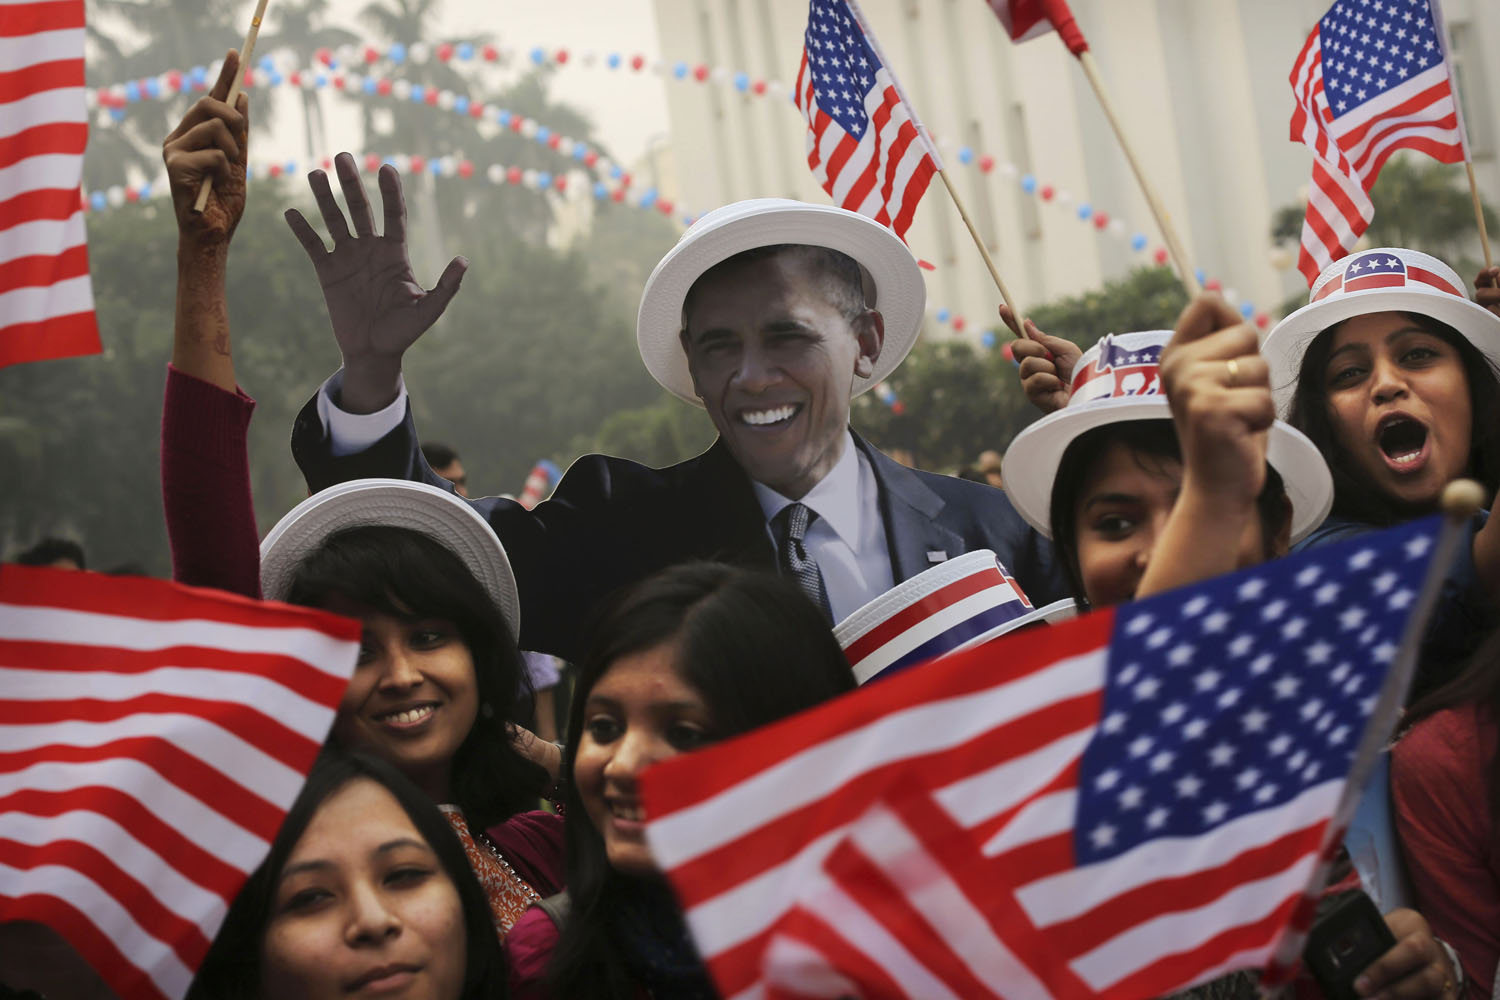 Image: Nov. 7, 2012. Indian students next to a cardboard cutout of President Obama after he was projected as the winner during an event organized by the U.S embassy at the landmark Imperial Hotel in New Delhi.